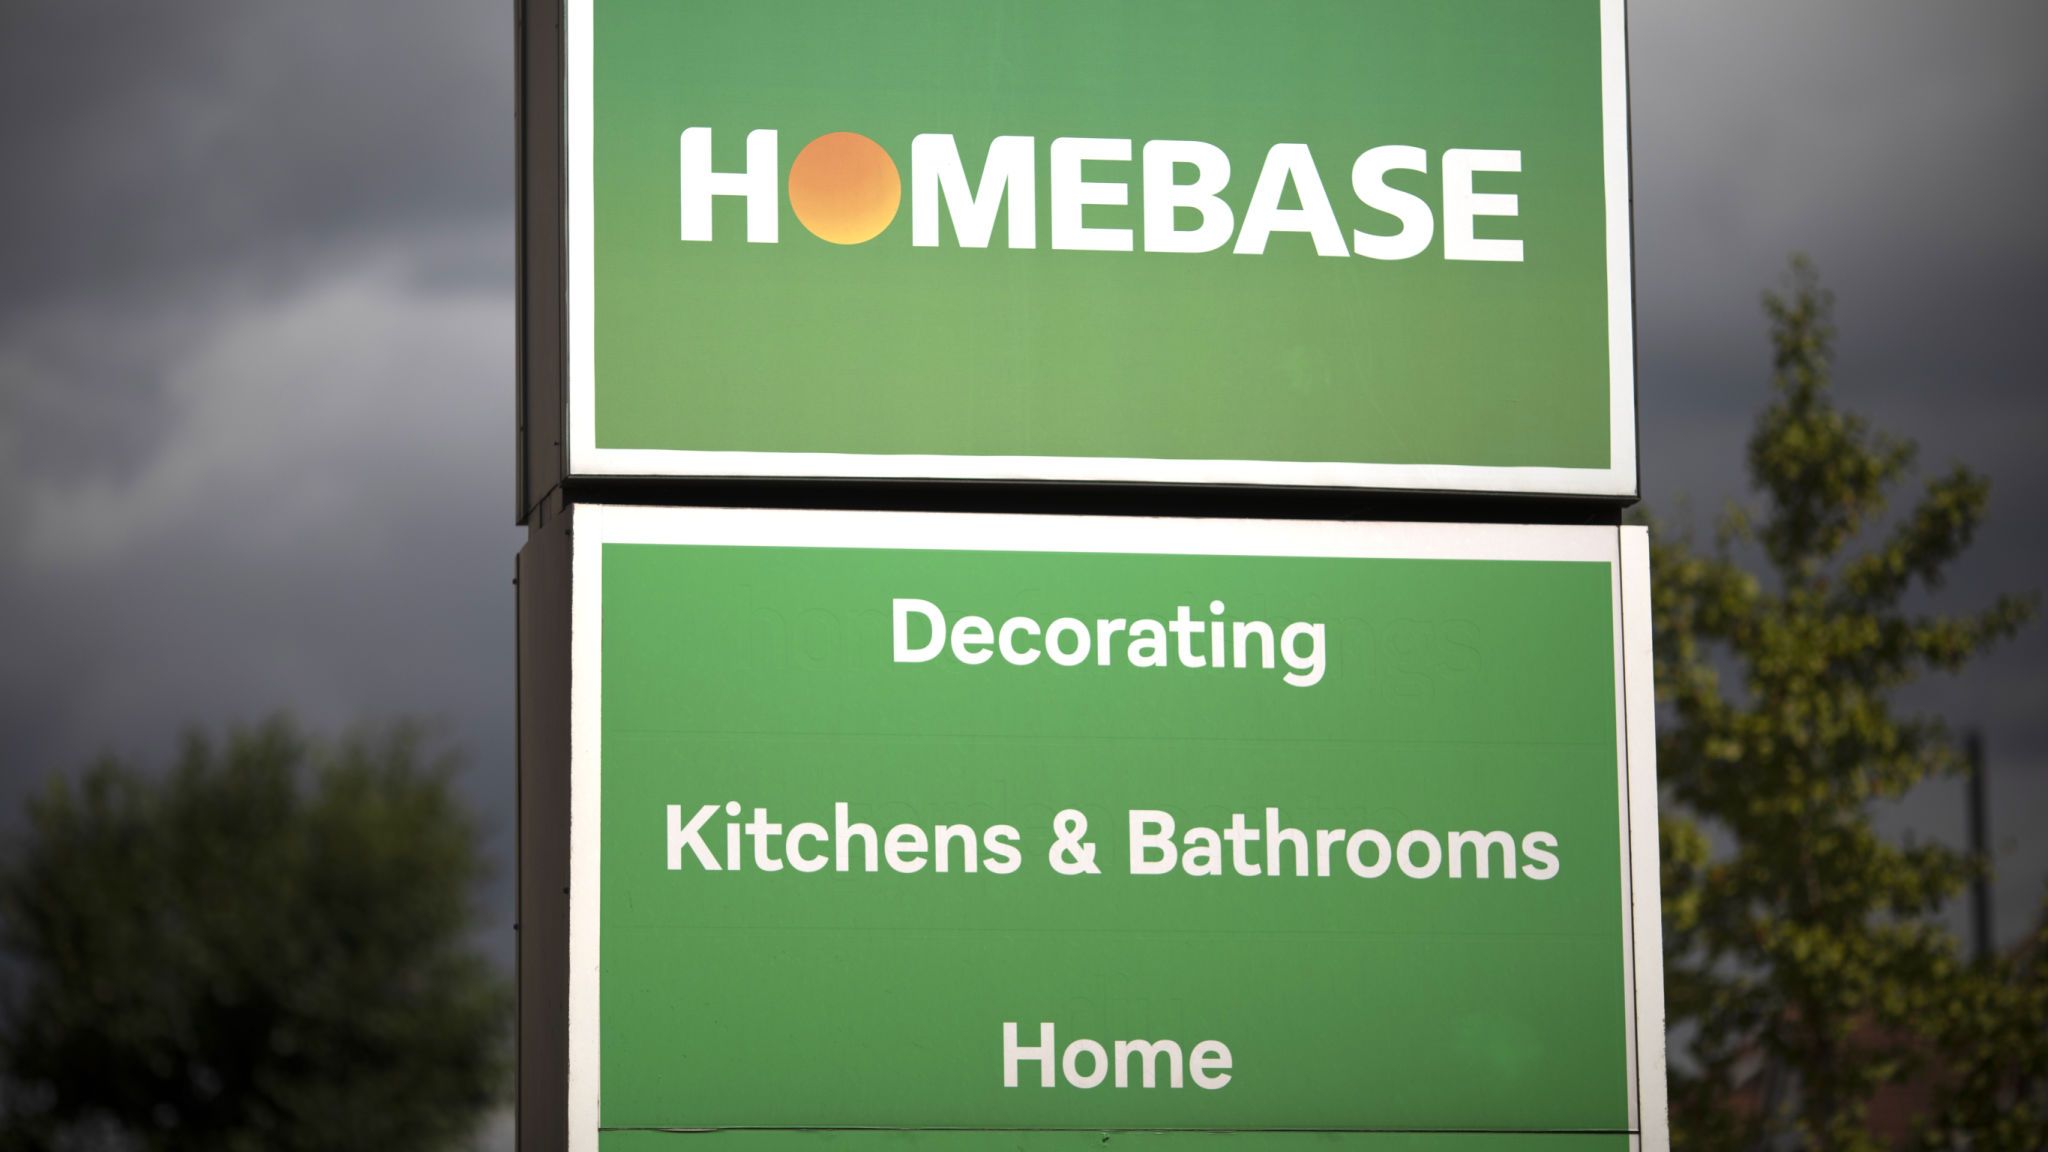 Consumers Found The Homebase Website Difficult To Use - Signage - HD Wallpaper 